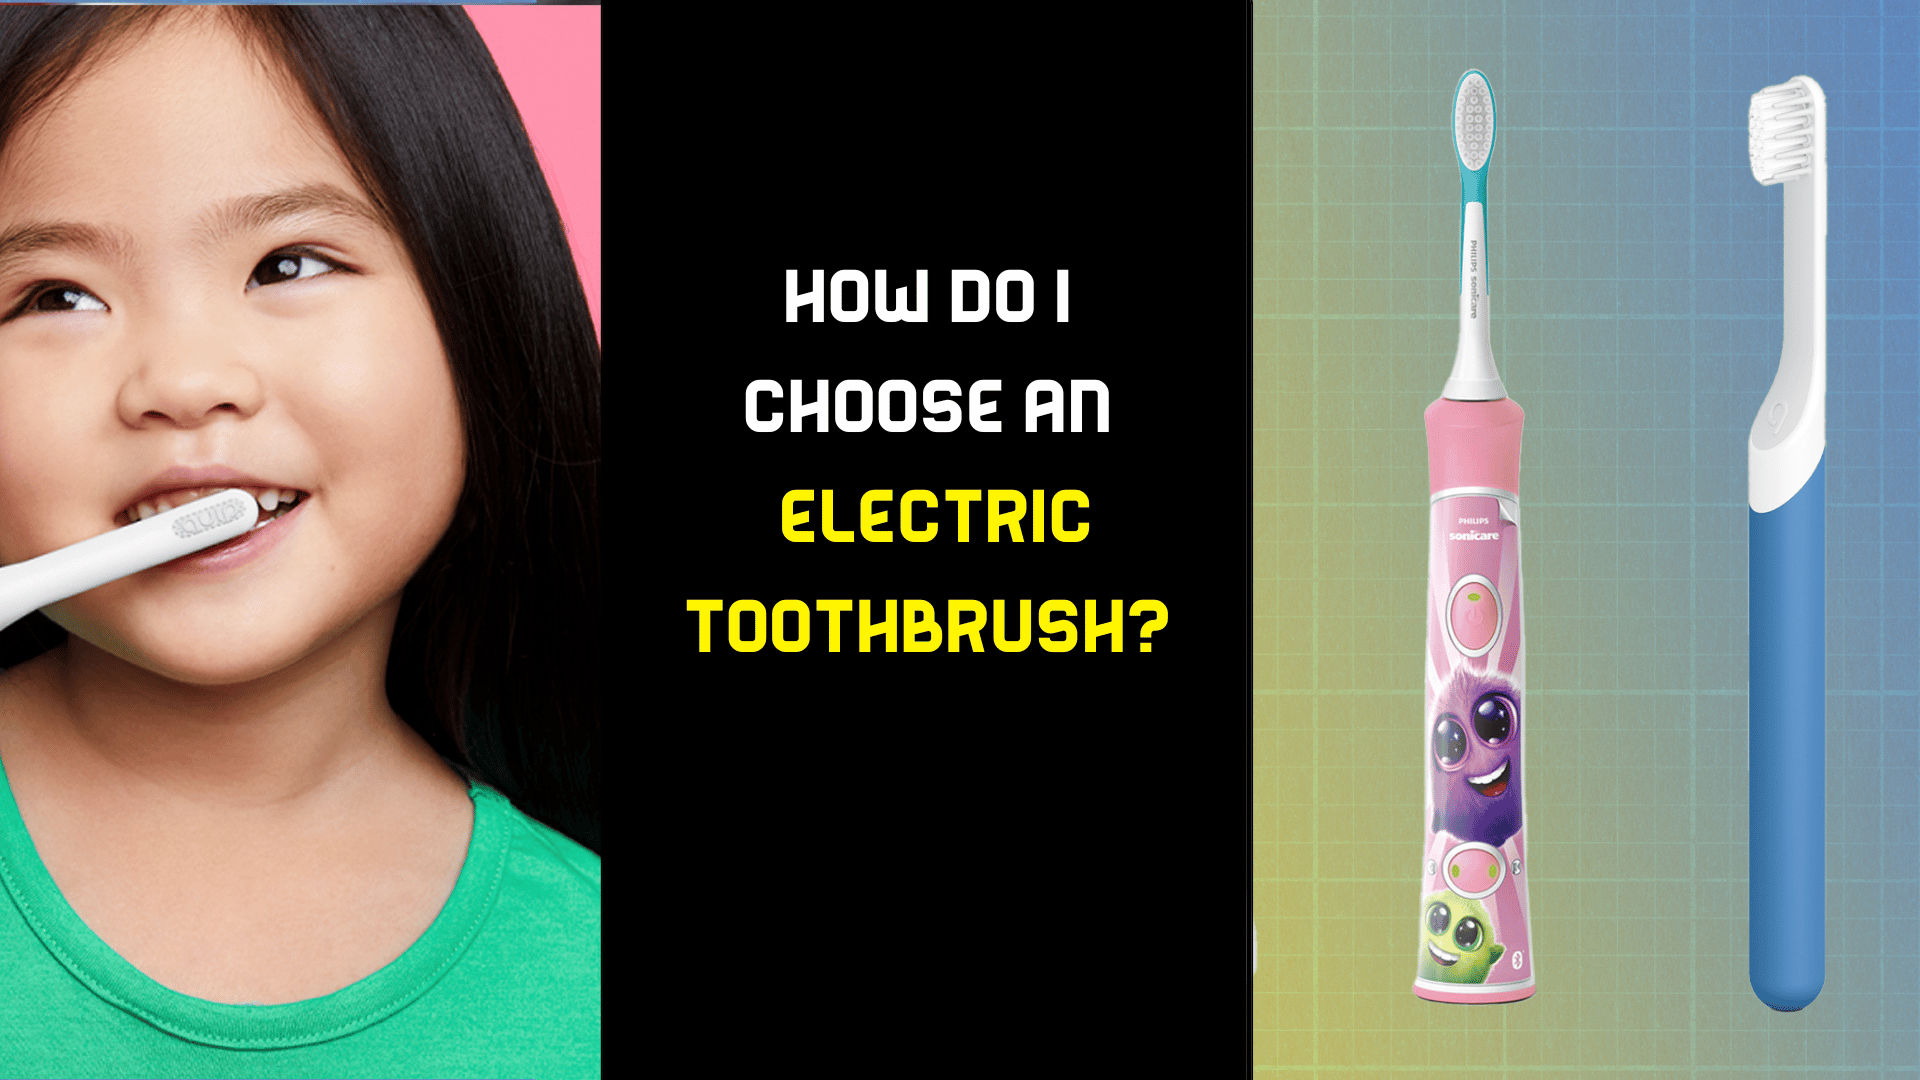 How Do I Choose an Electric Toothbrush